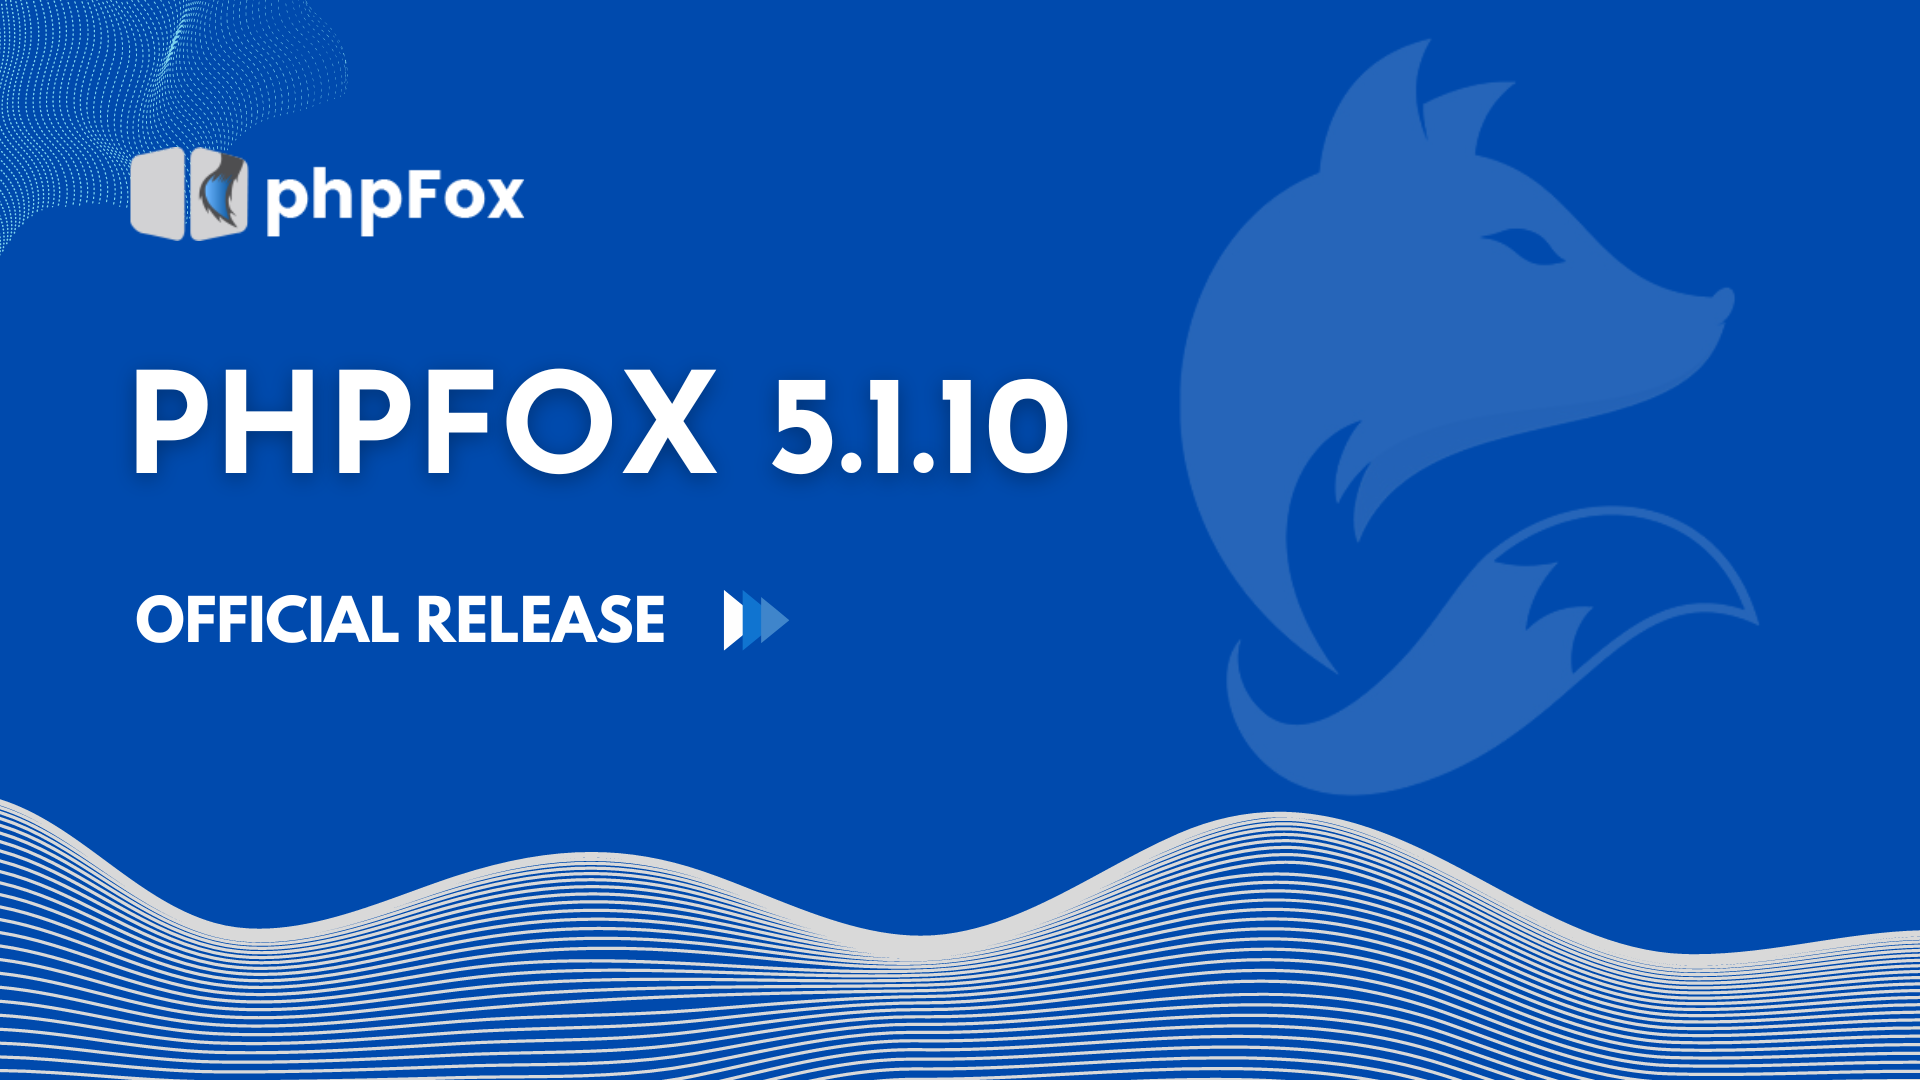 phpFox 5.1.10 Official Release